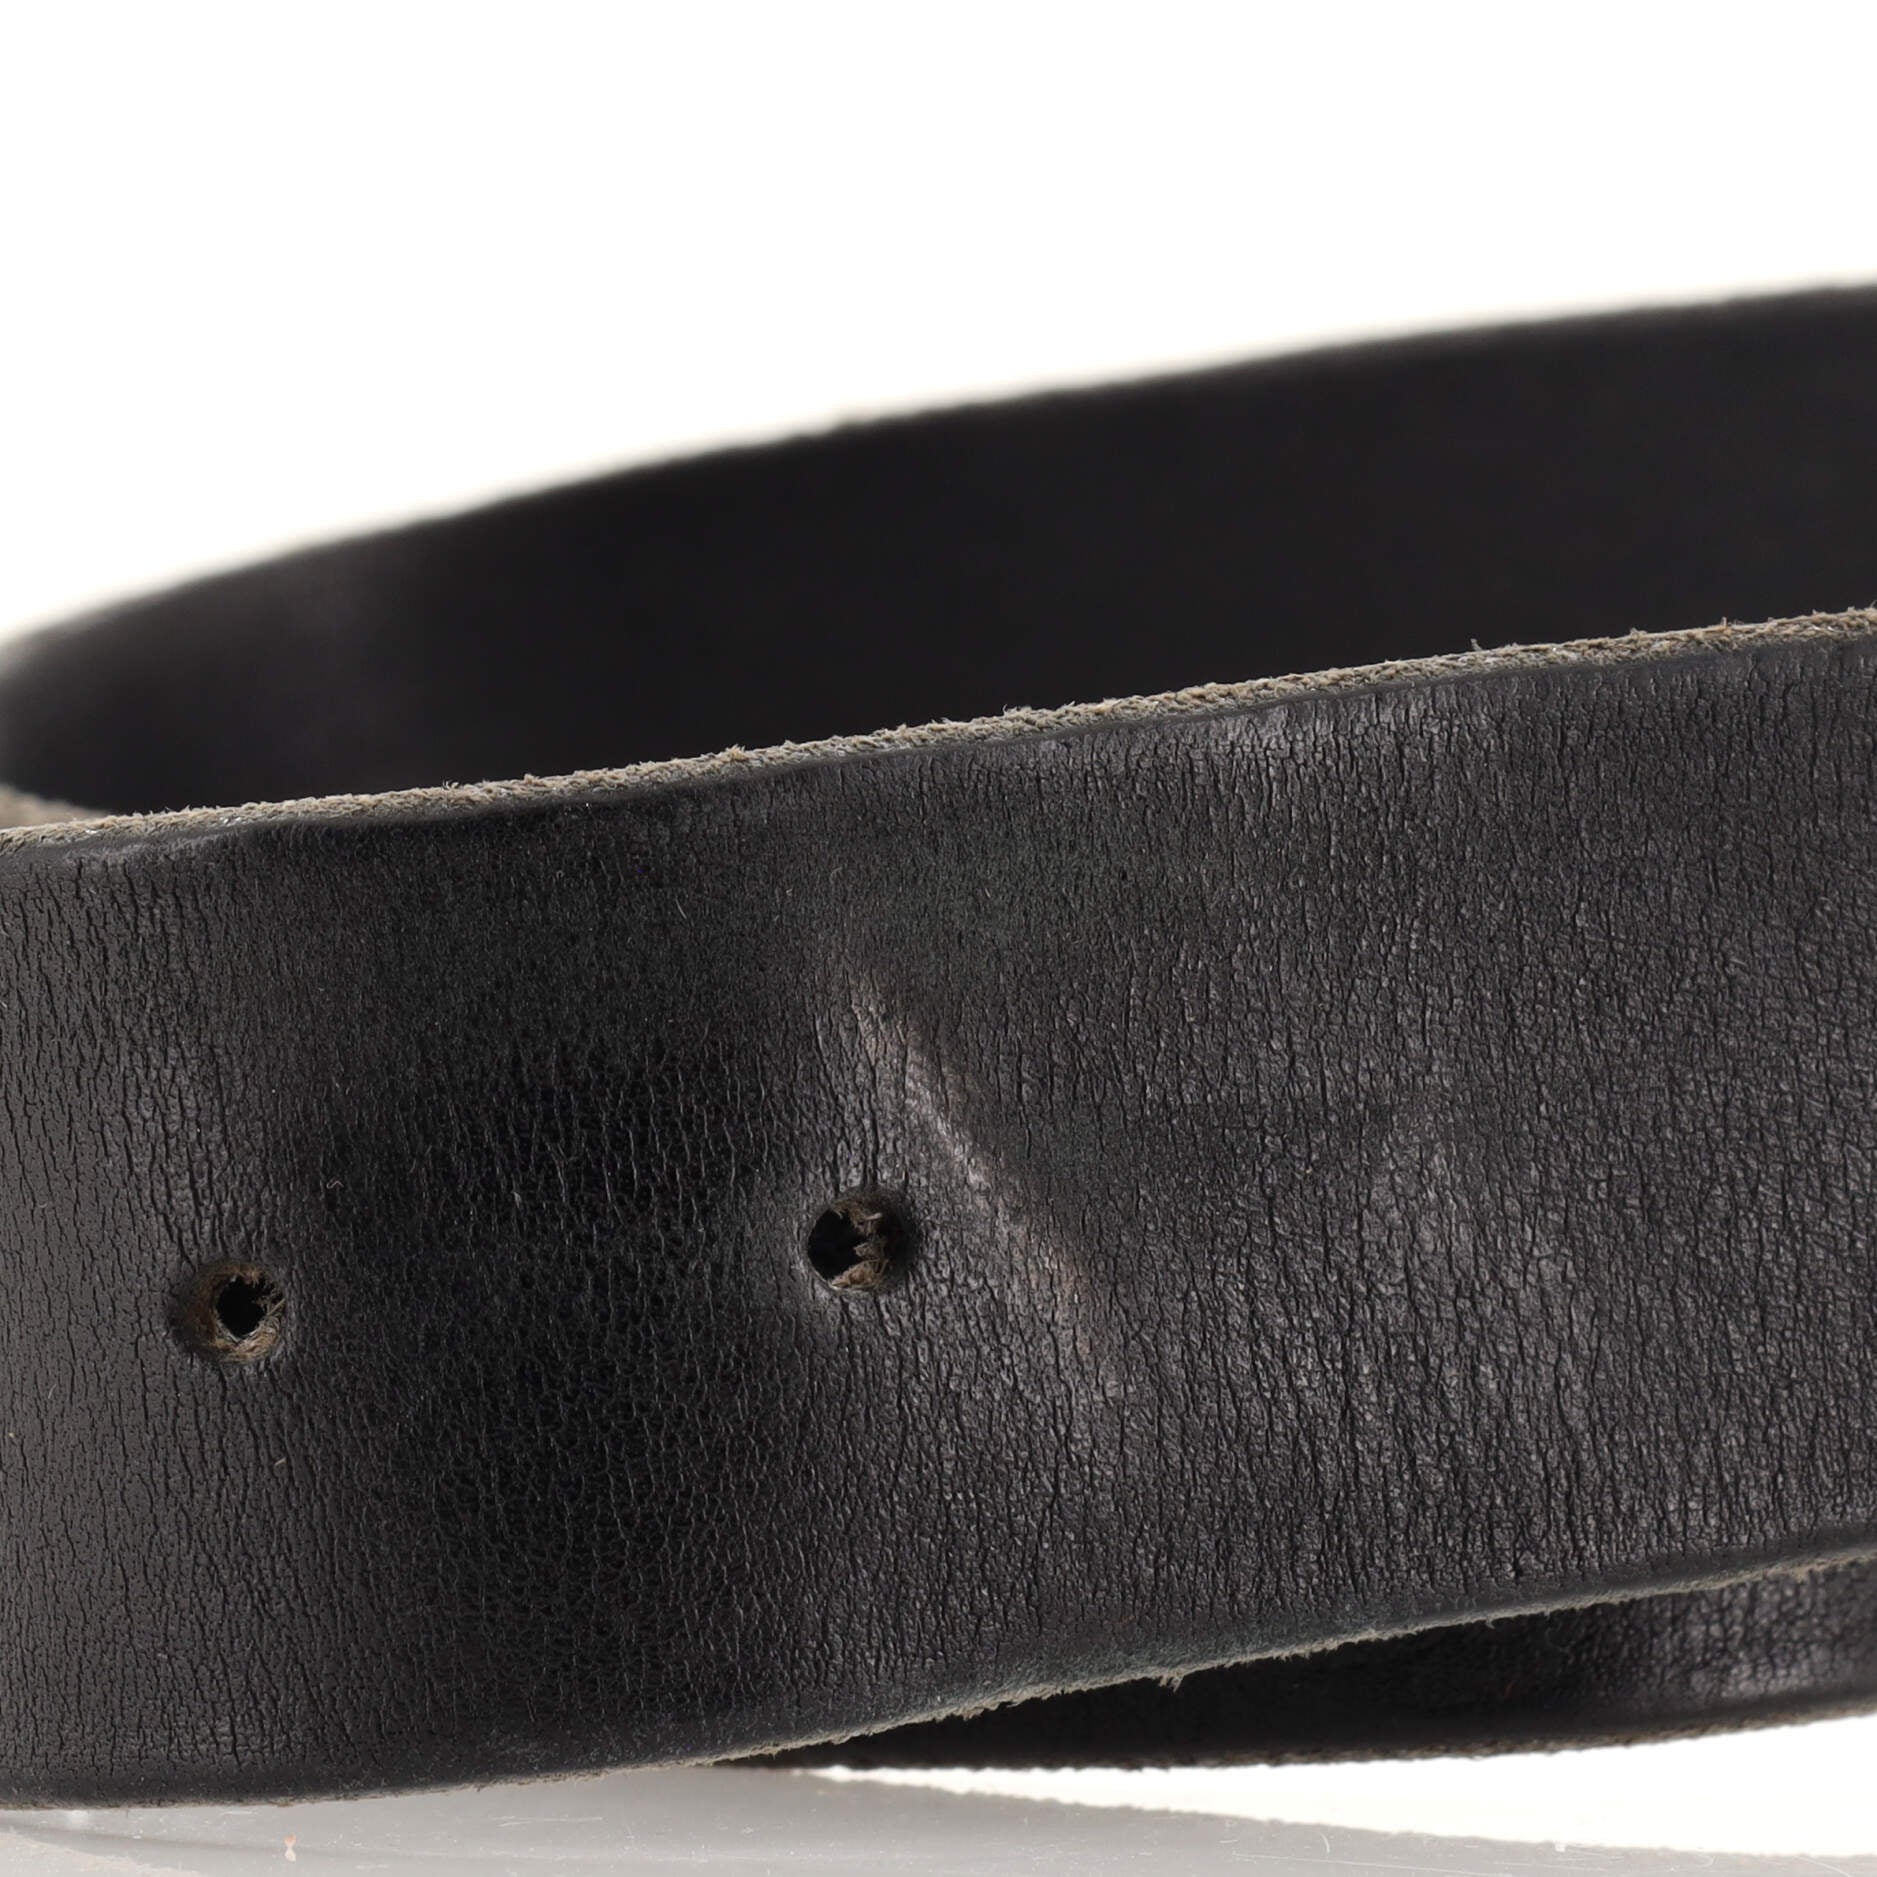 Gucci Leather Belt With Snake Buckle in Black for Men